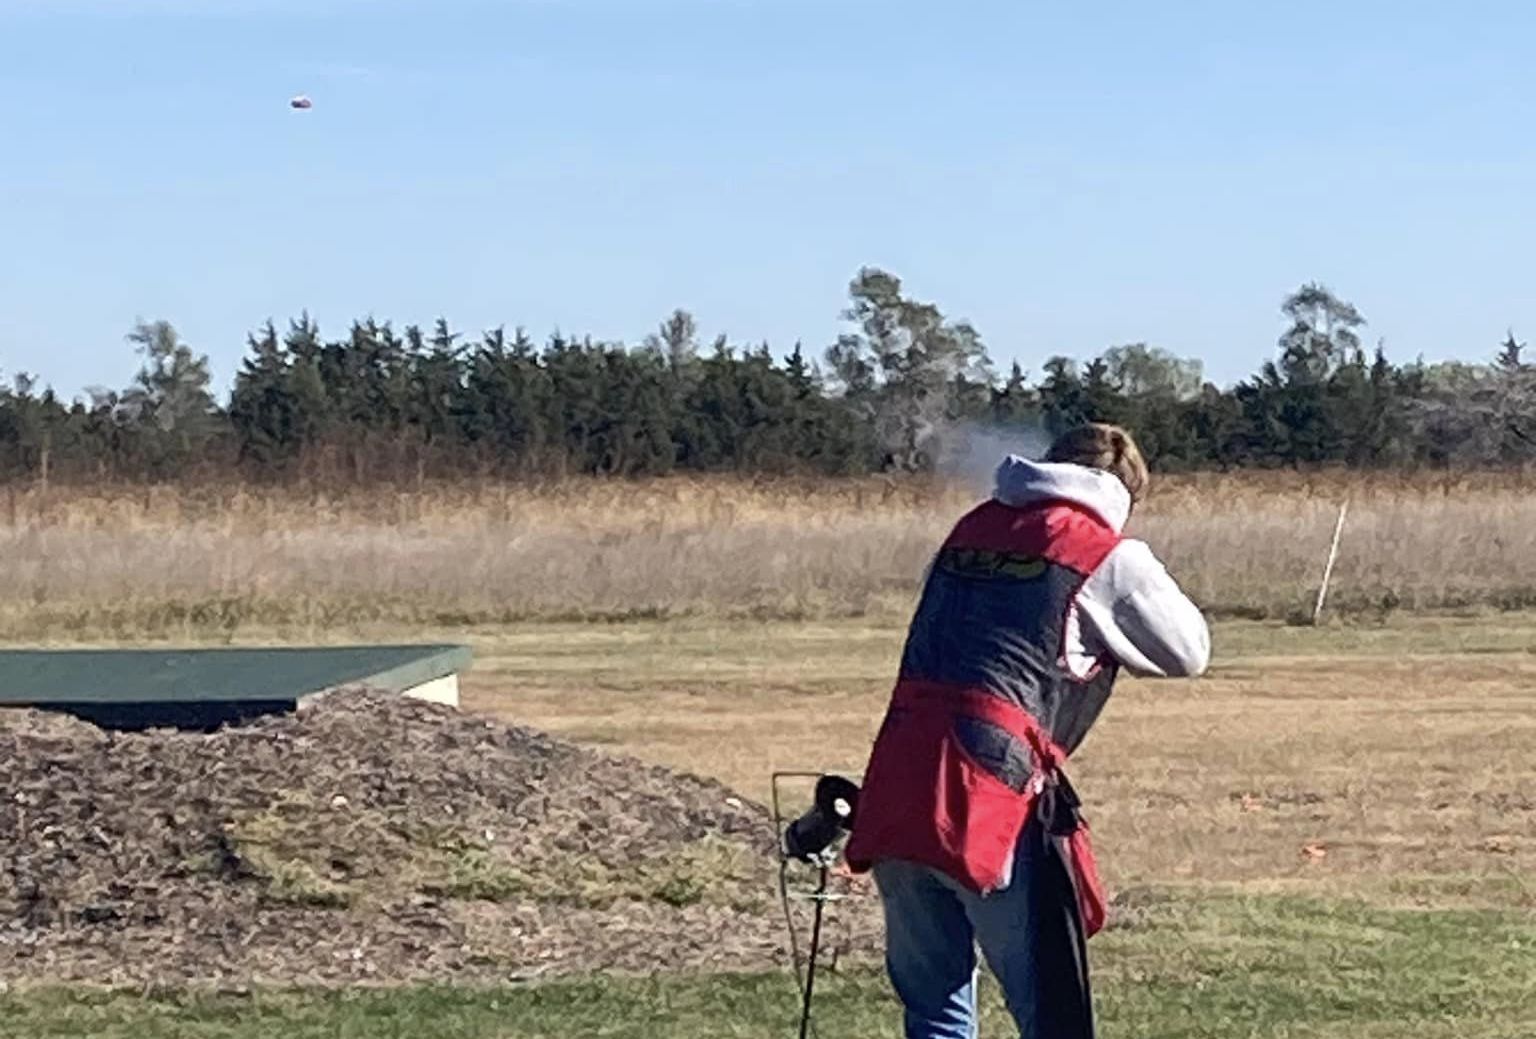 Shooting Sports Compete at Bronco Invite